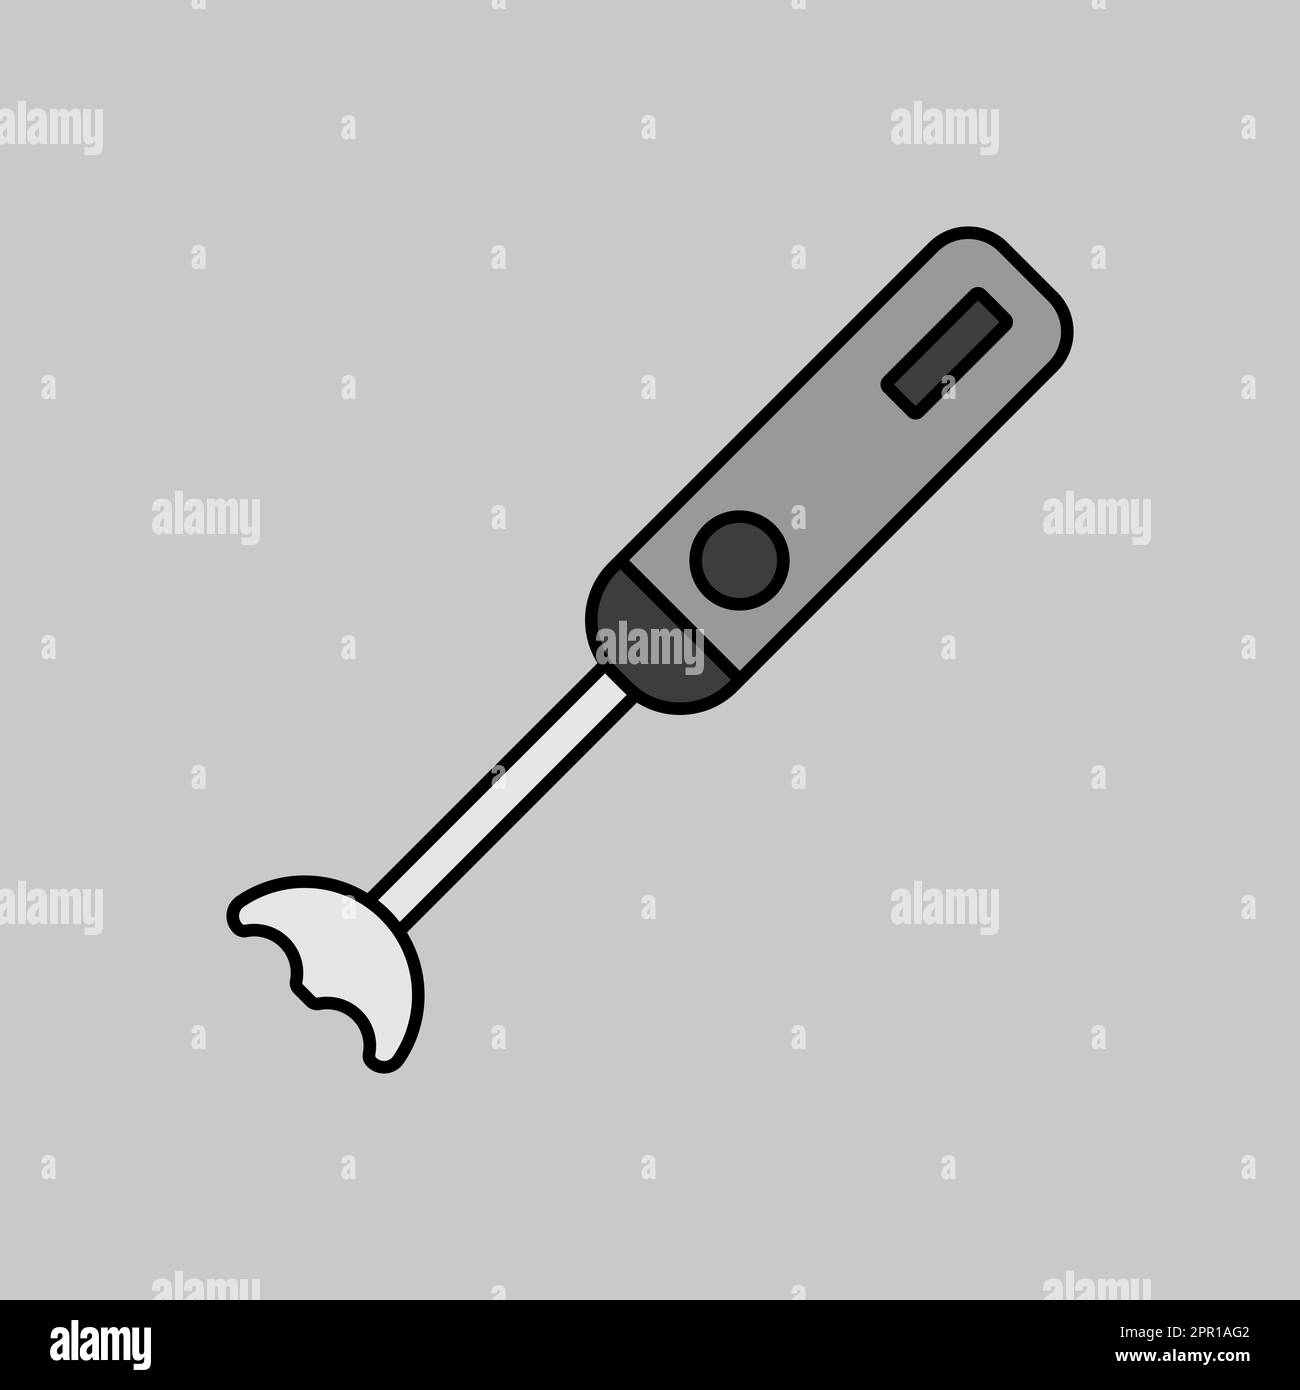 Hand blender vector grayscale icon Stock Vector